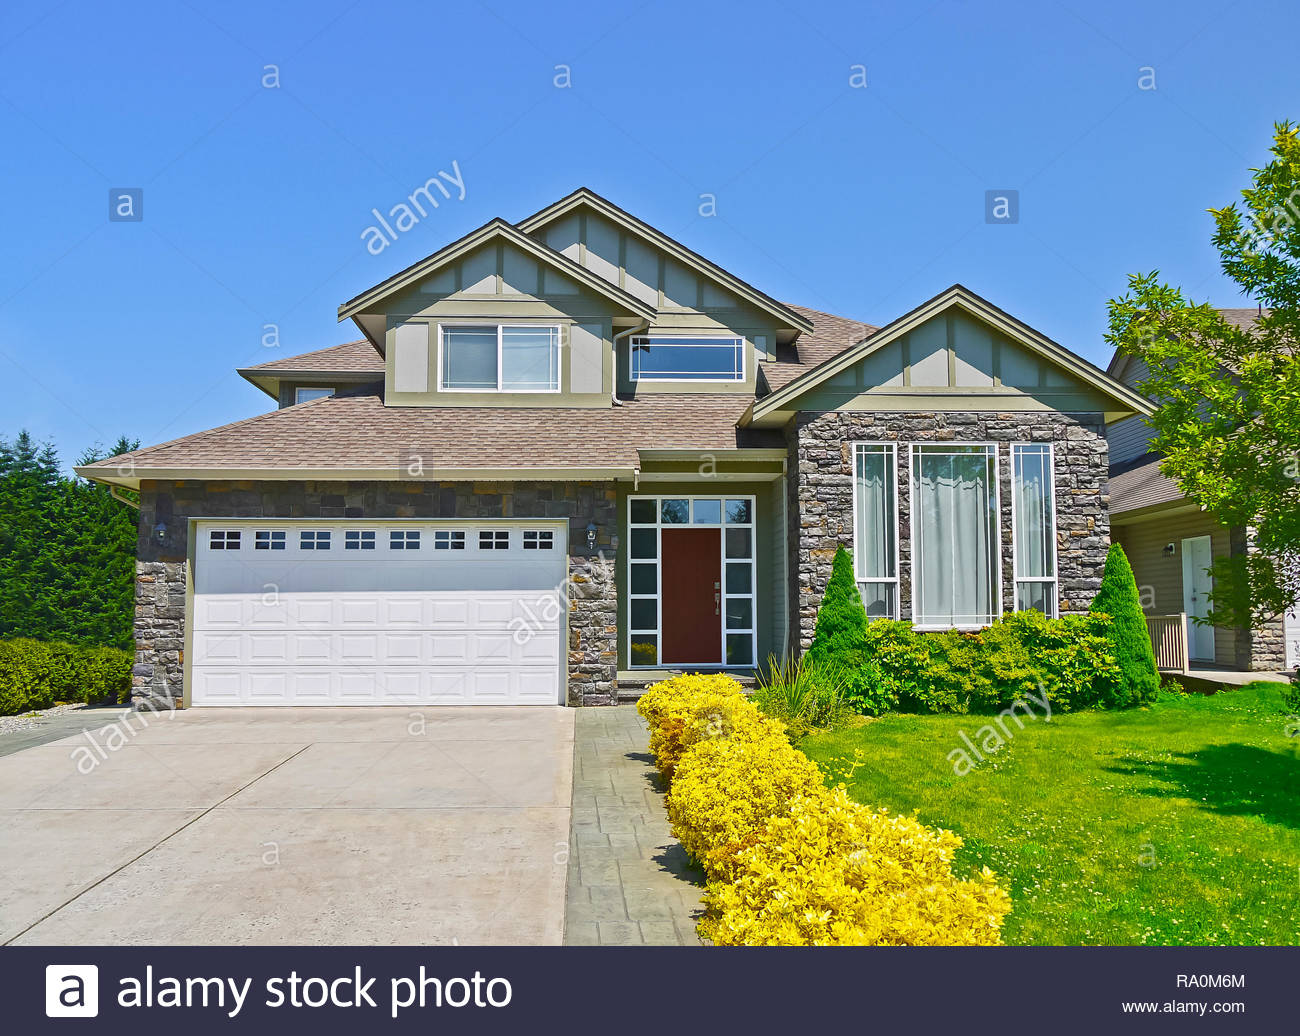 Luxury Family House With Concrete Driveway To The Garage On Blue